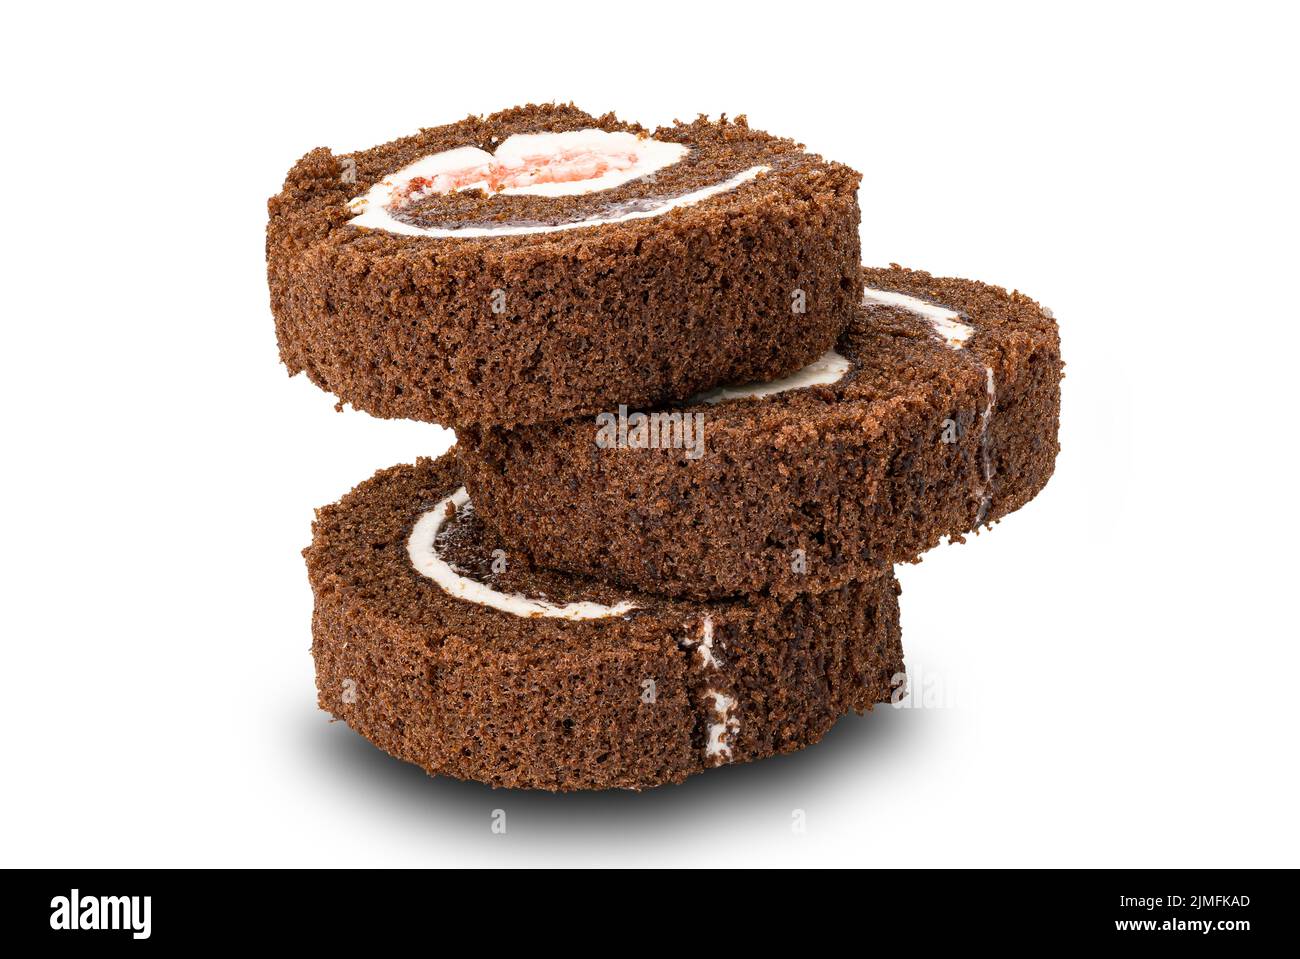 Stack of homemade Mini Black Forest Chocolate Sponge Cake Roll isolated on white background. Stock Photo